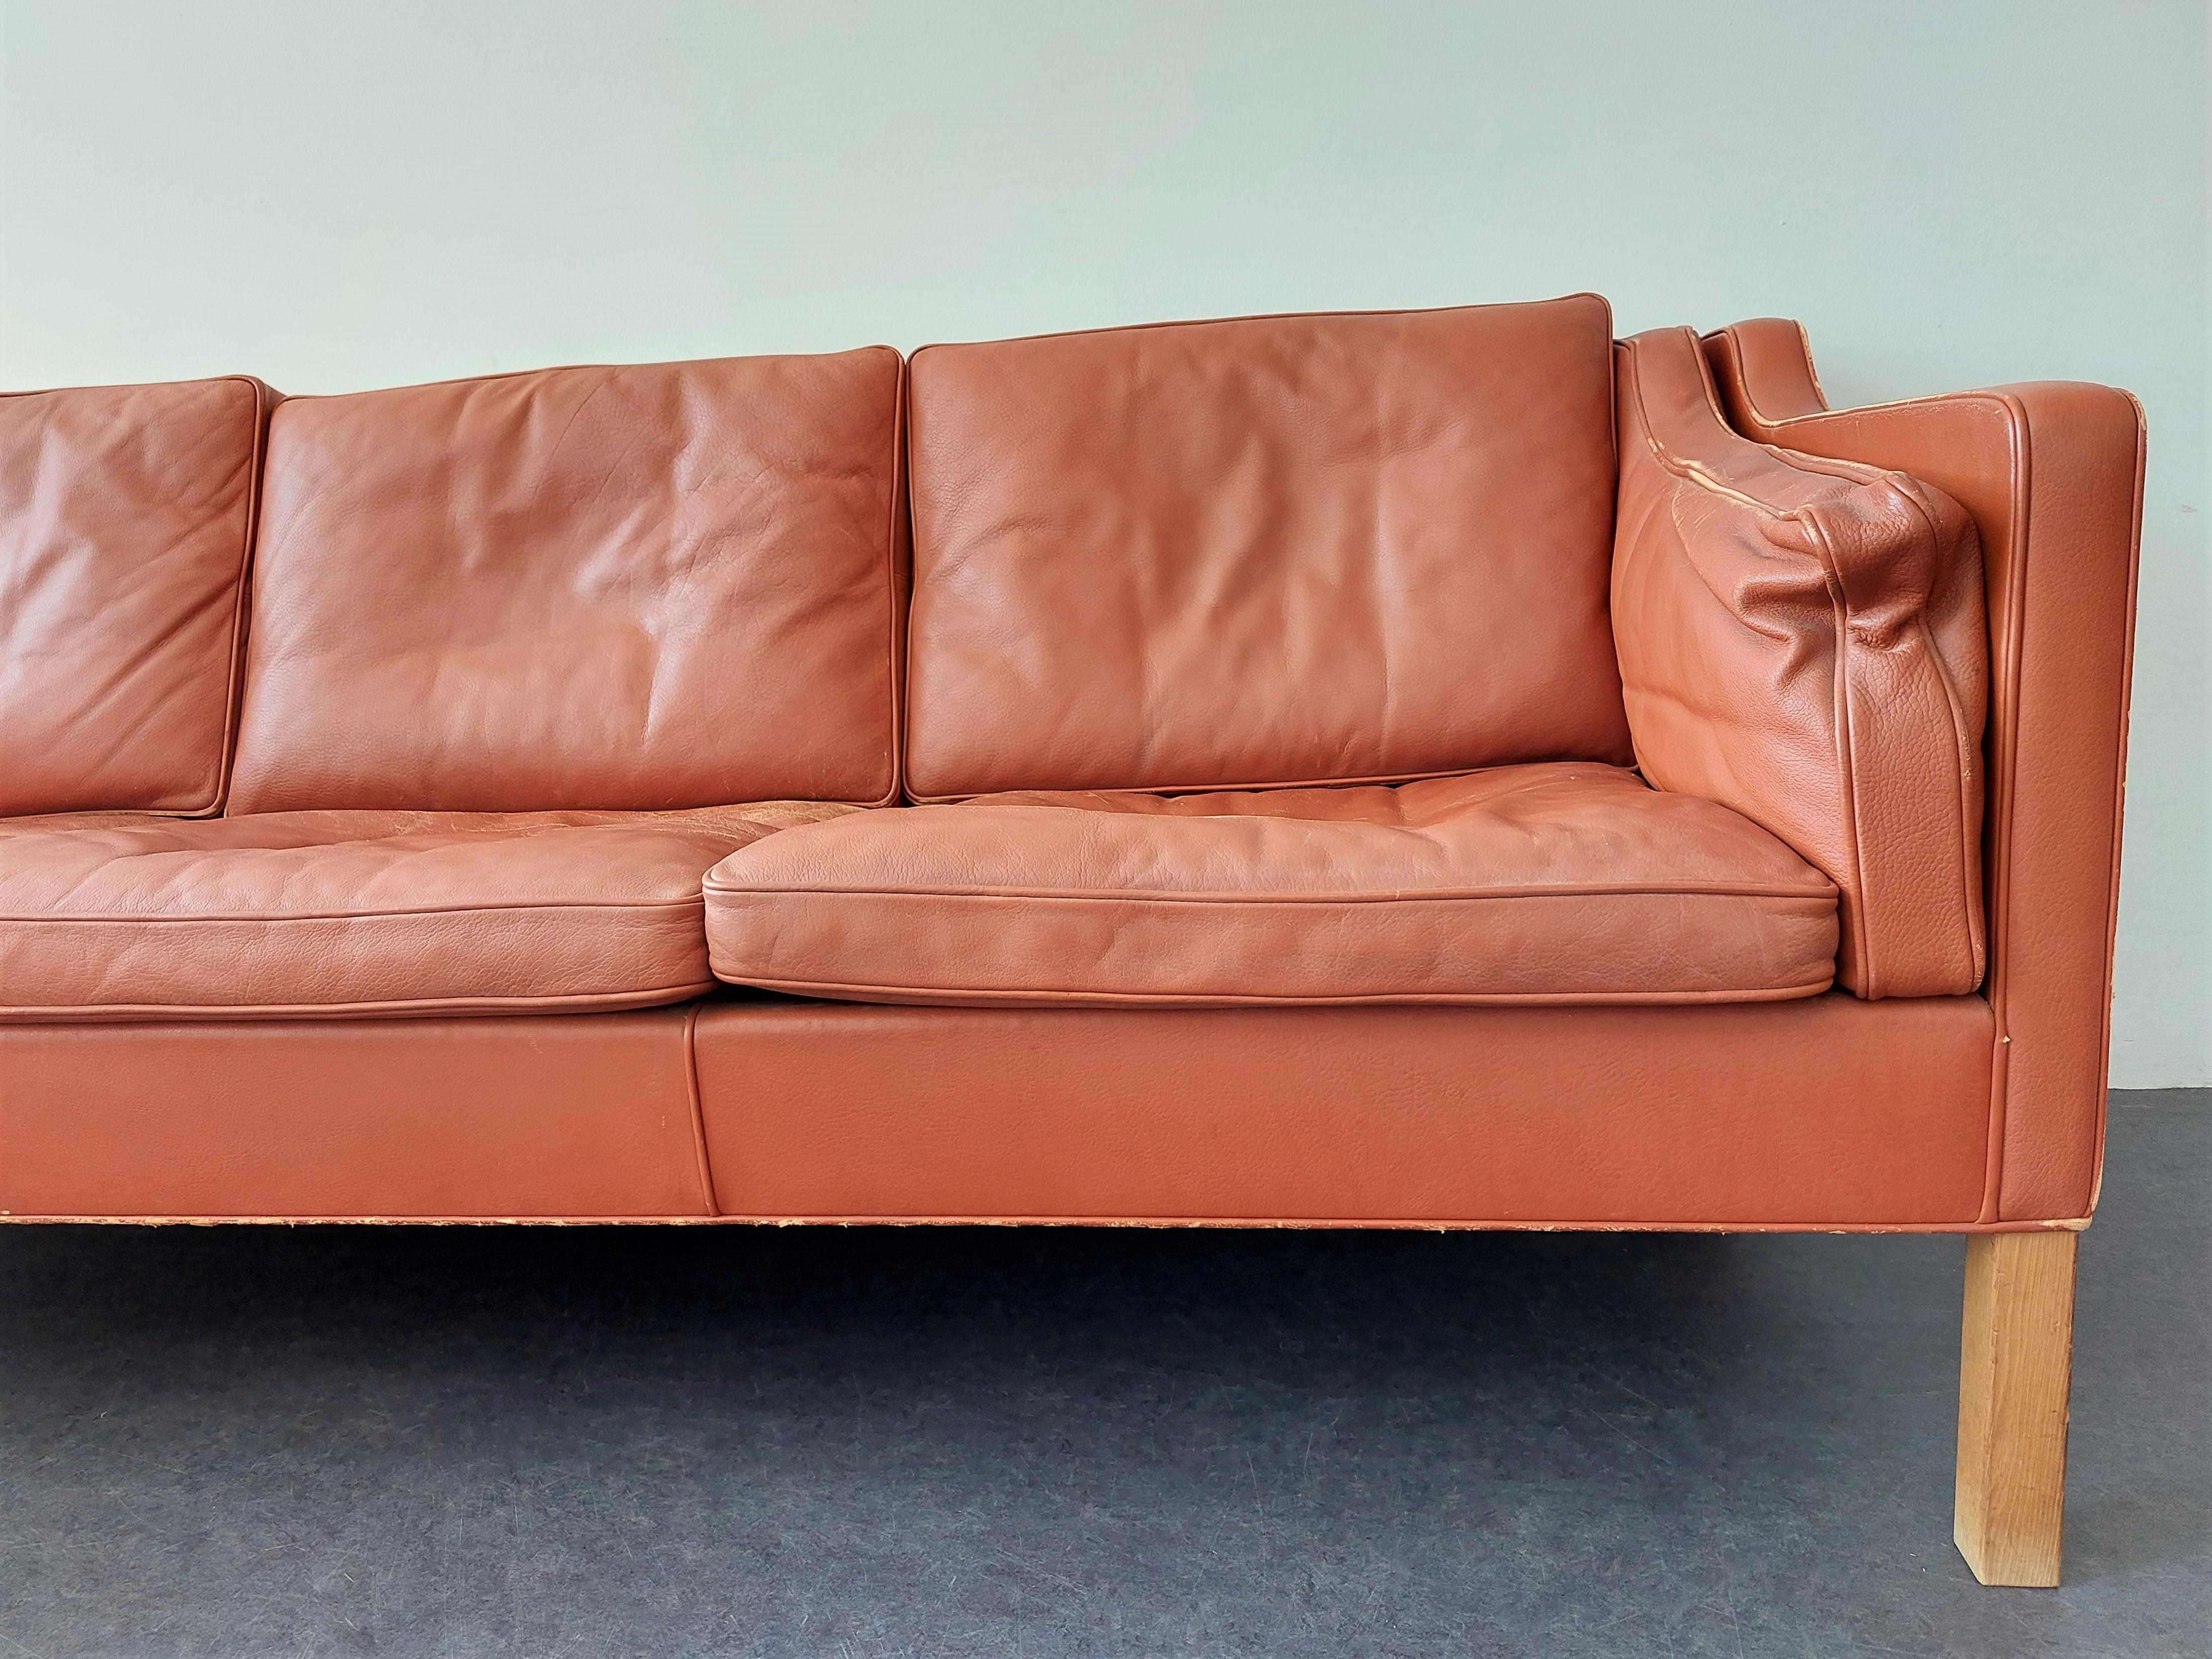 Mid-Century Modern 2213 3-seater leather sofa by Børge Mogensen for Fredericia, Denmark 1962 For Sale